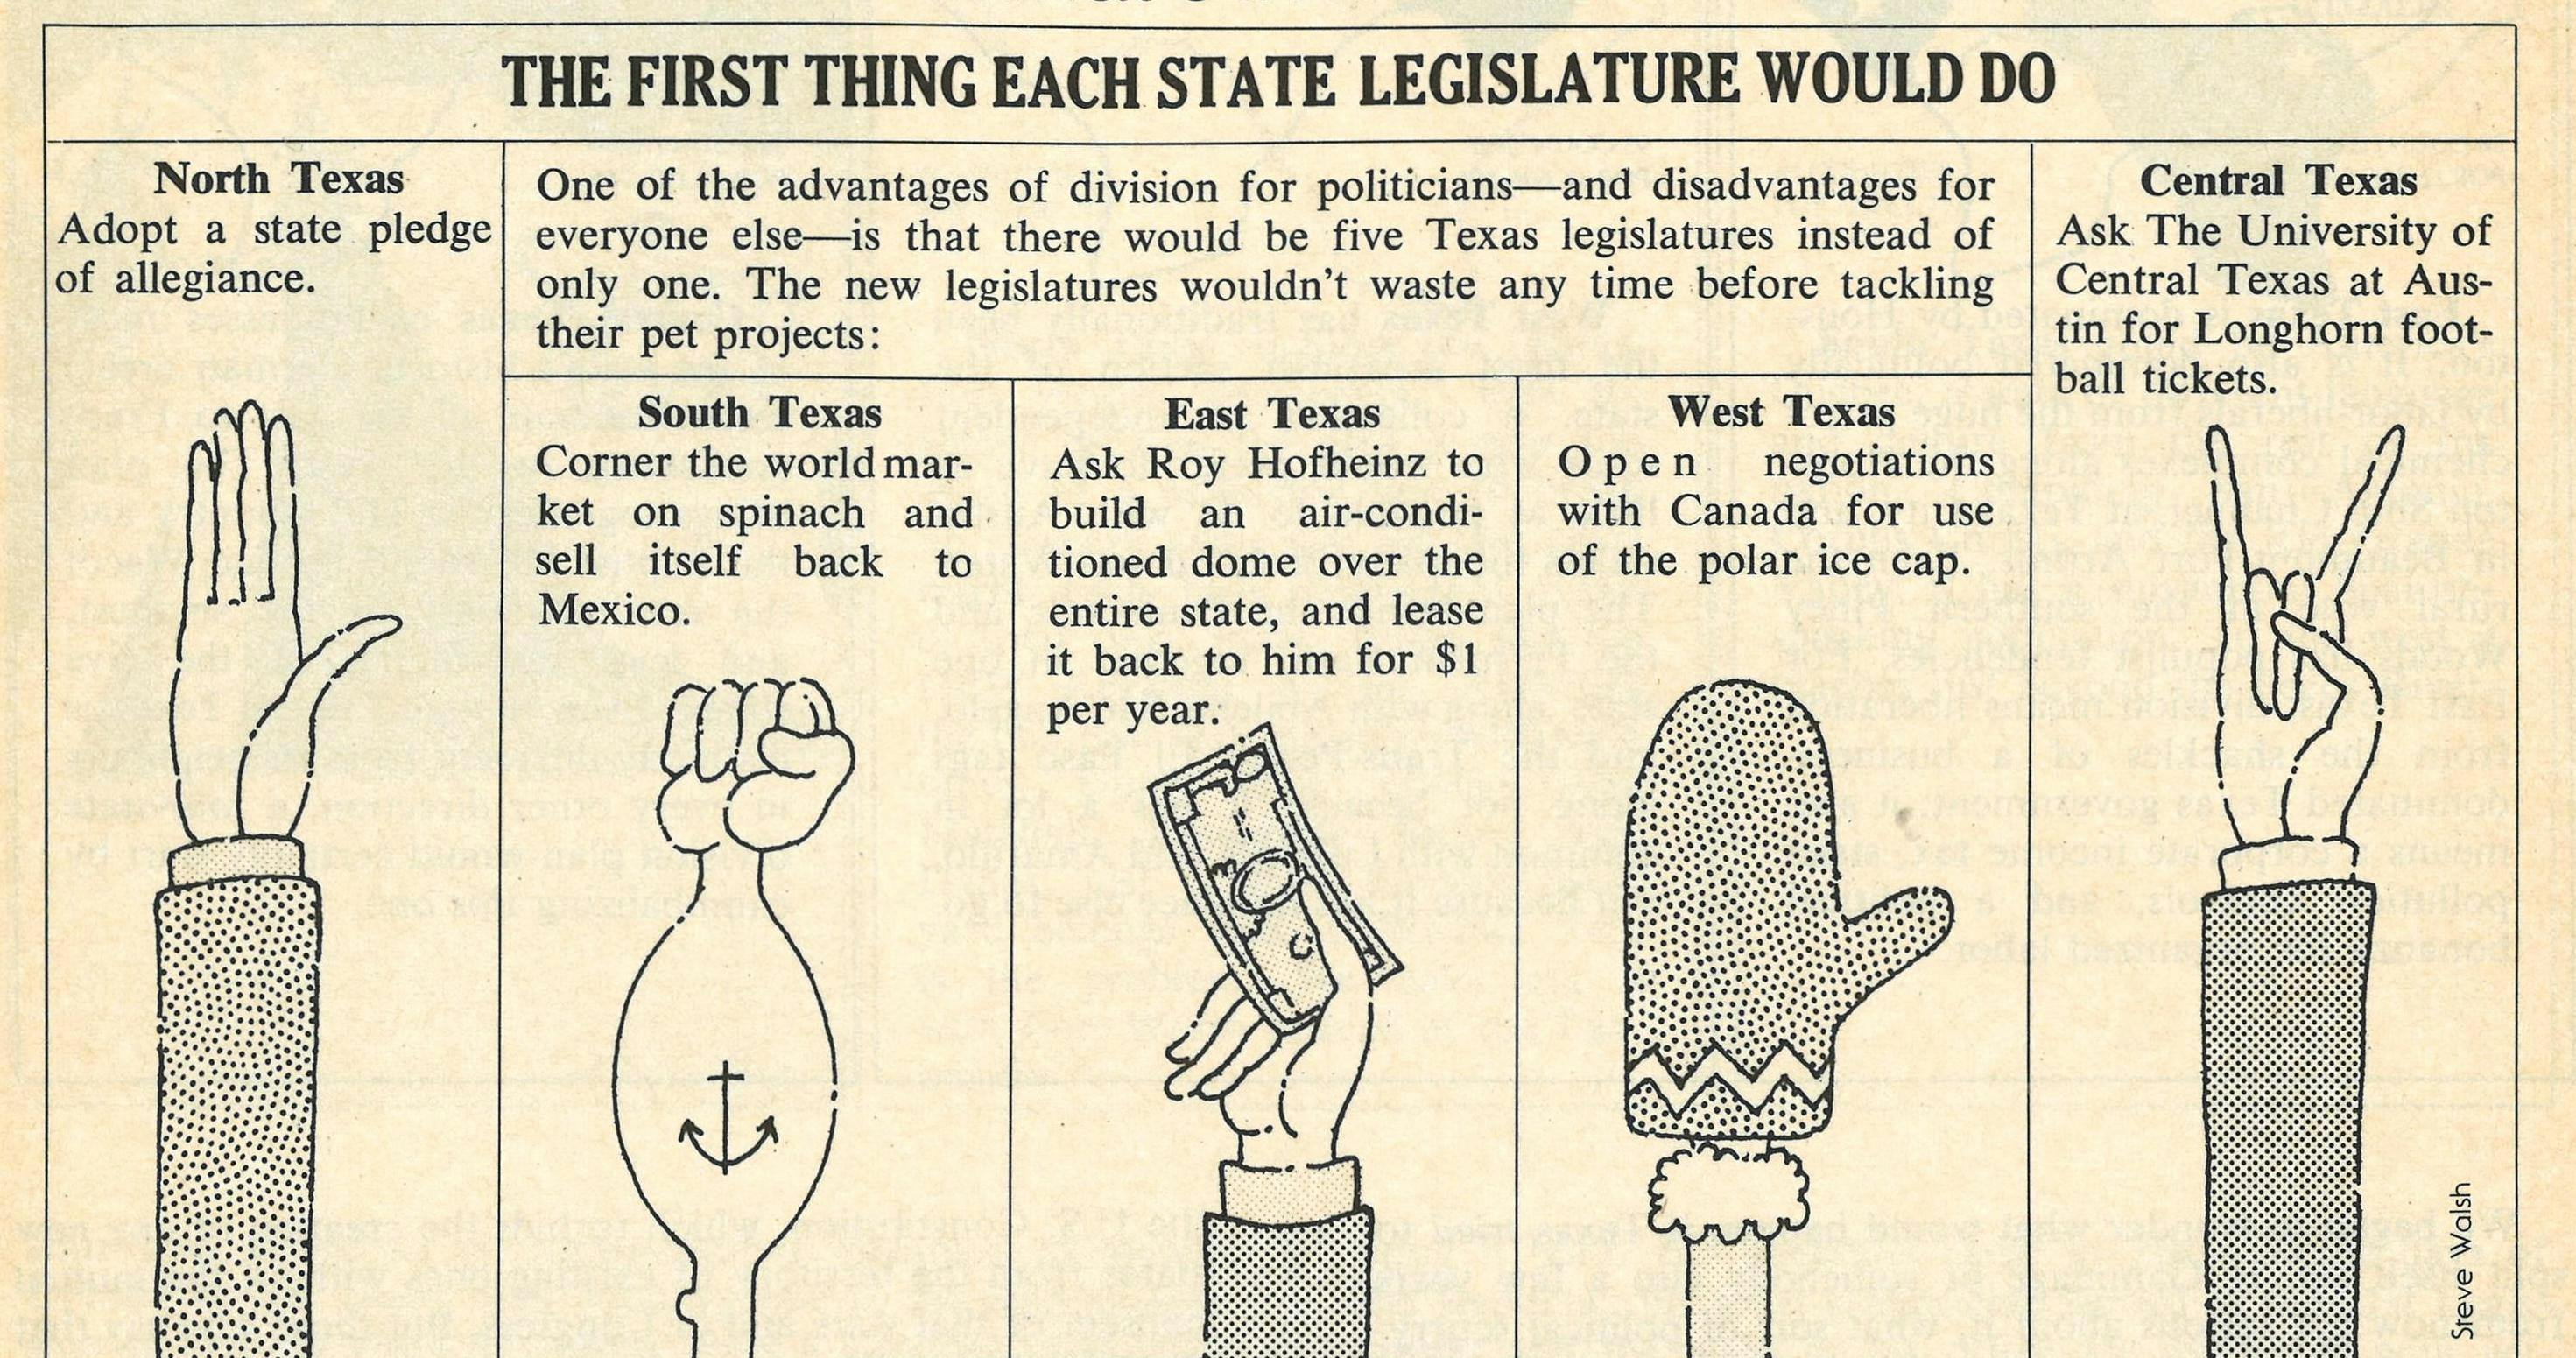 Comic describing "the first thing each state legislature would do."